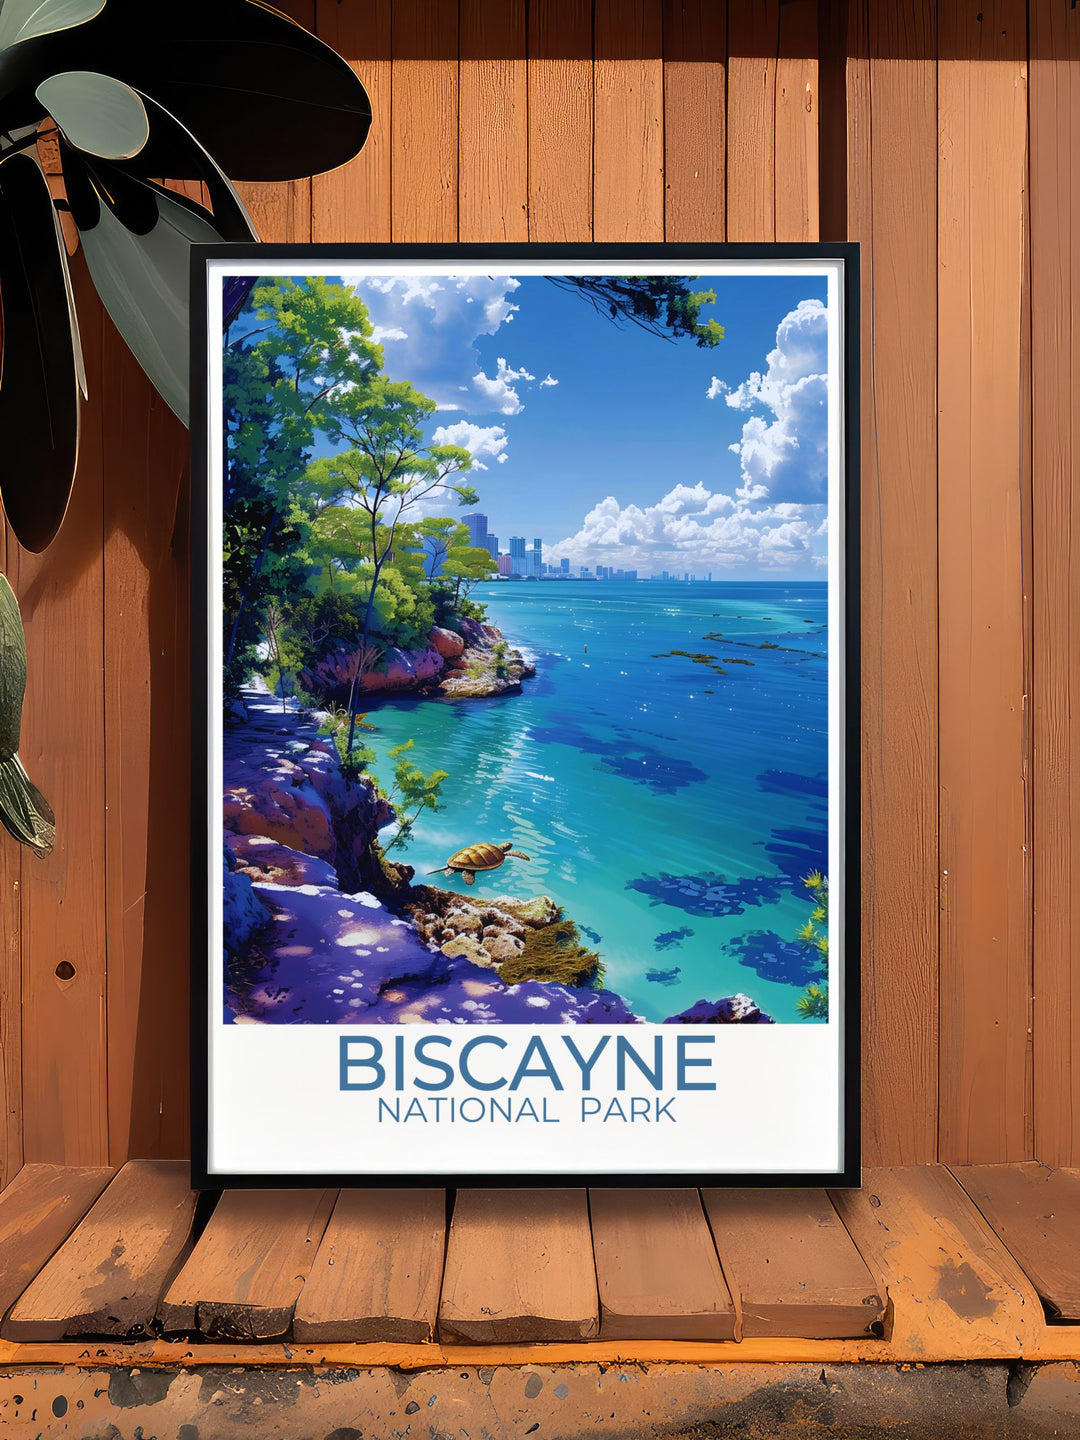 Captivating Biscayne National Park poster featuring the serene Biscayne Bay Trail and vibrant coral reefs, showcasing the parks natural beauty and charm. Perfect for adding a touch of outdoor elegance to your home decor.